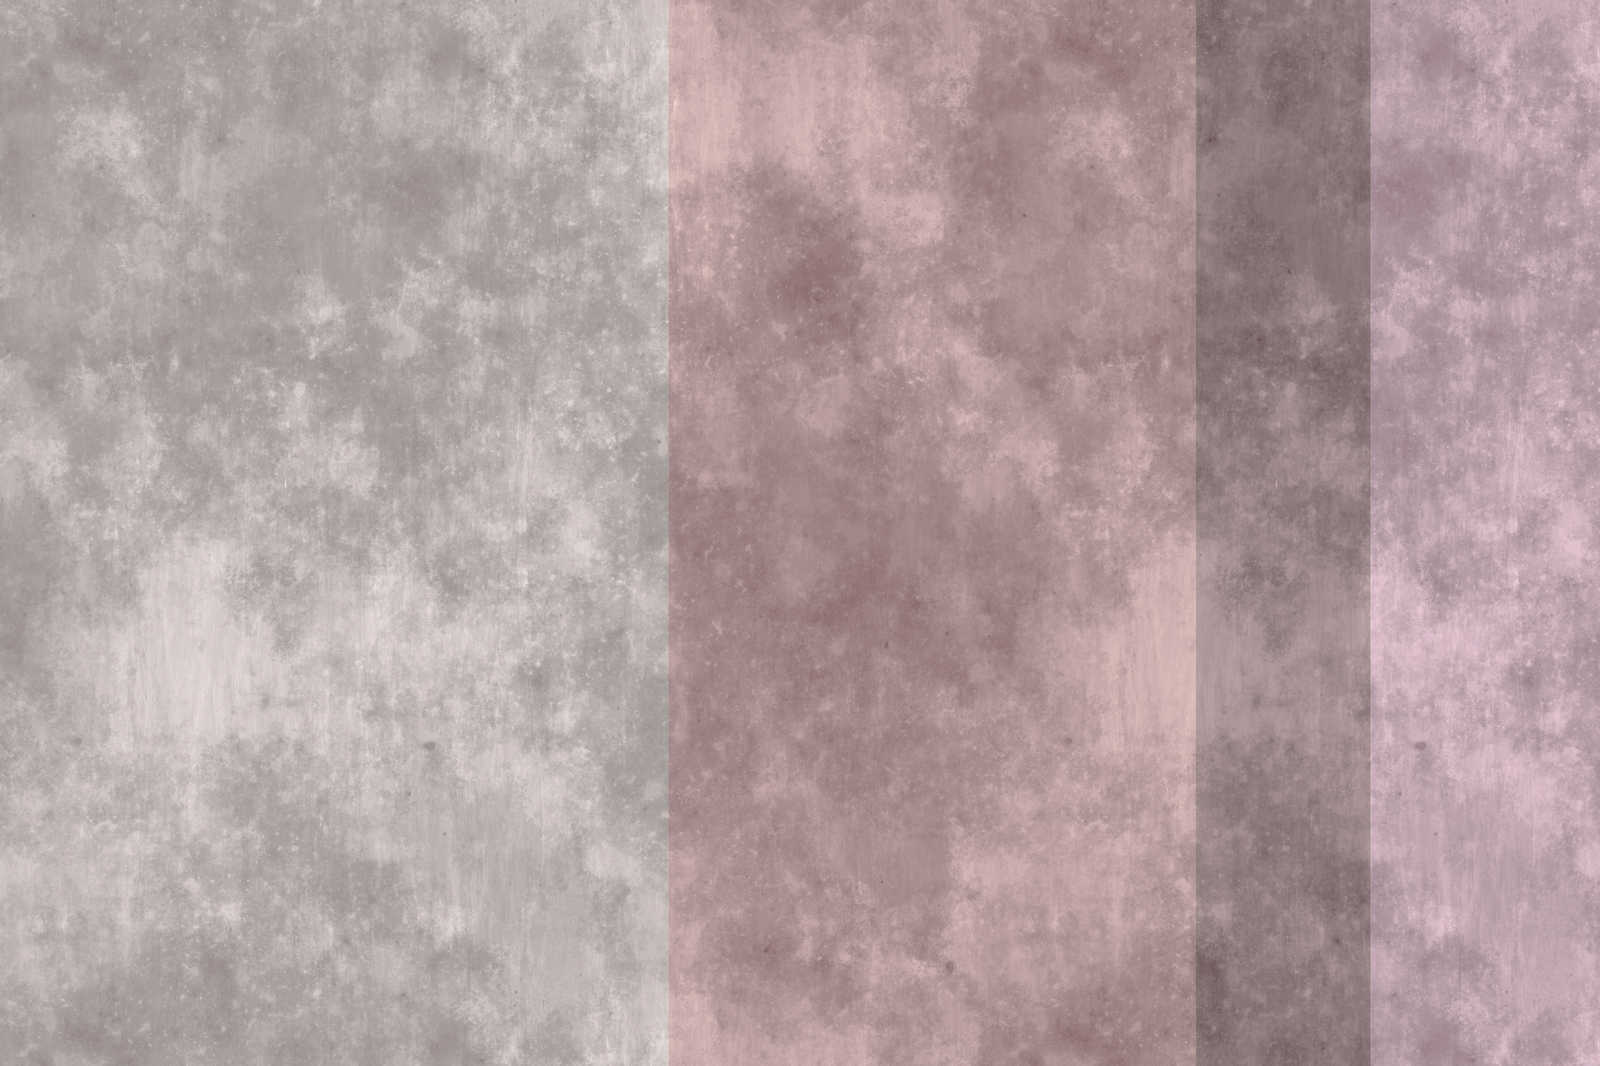             Concrete-look canvas picture with stripes | grey, pink - 1.20 m x 0.80 m
        